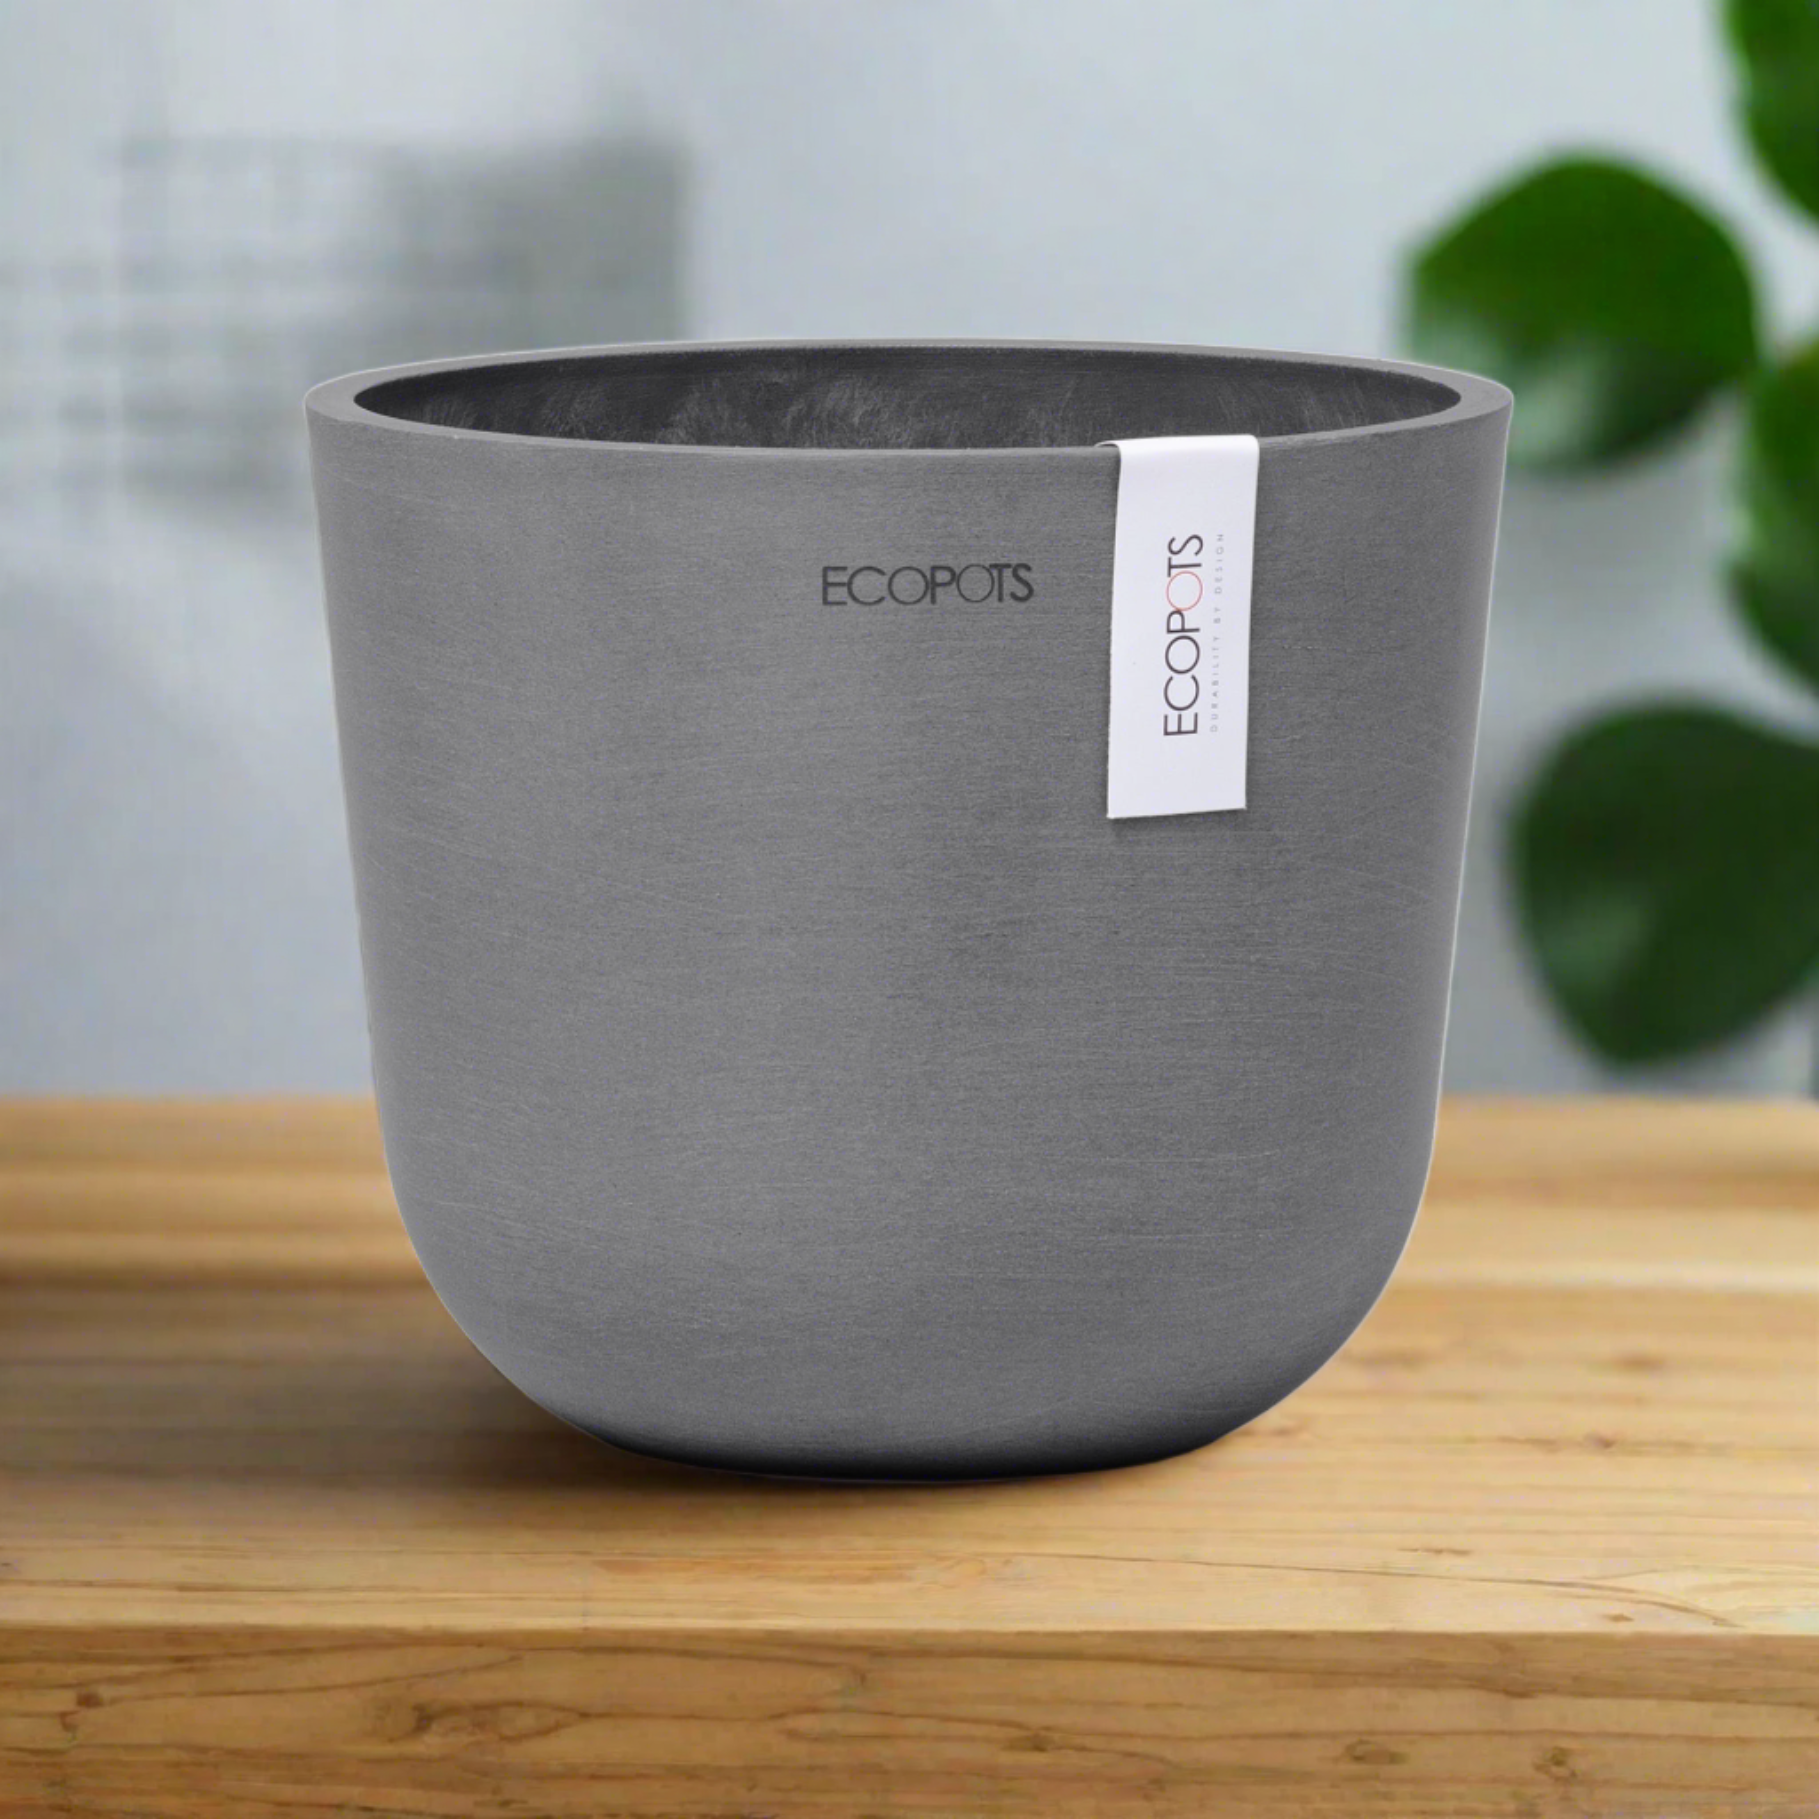 Oslo Eco Pot Grey on timber table top with green plant in background